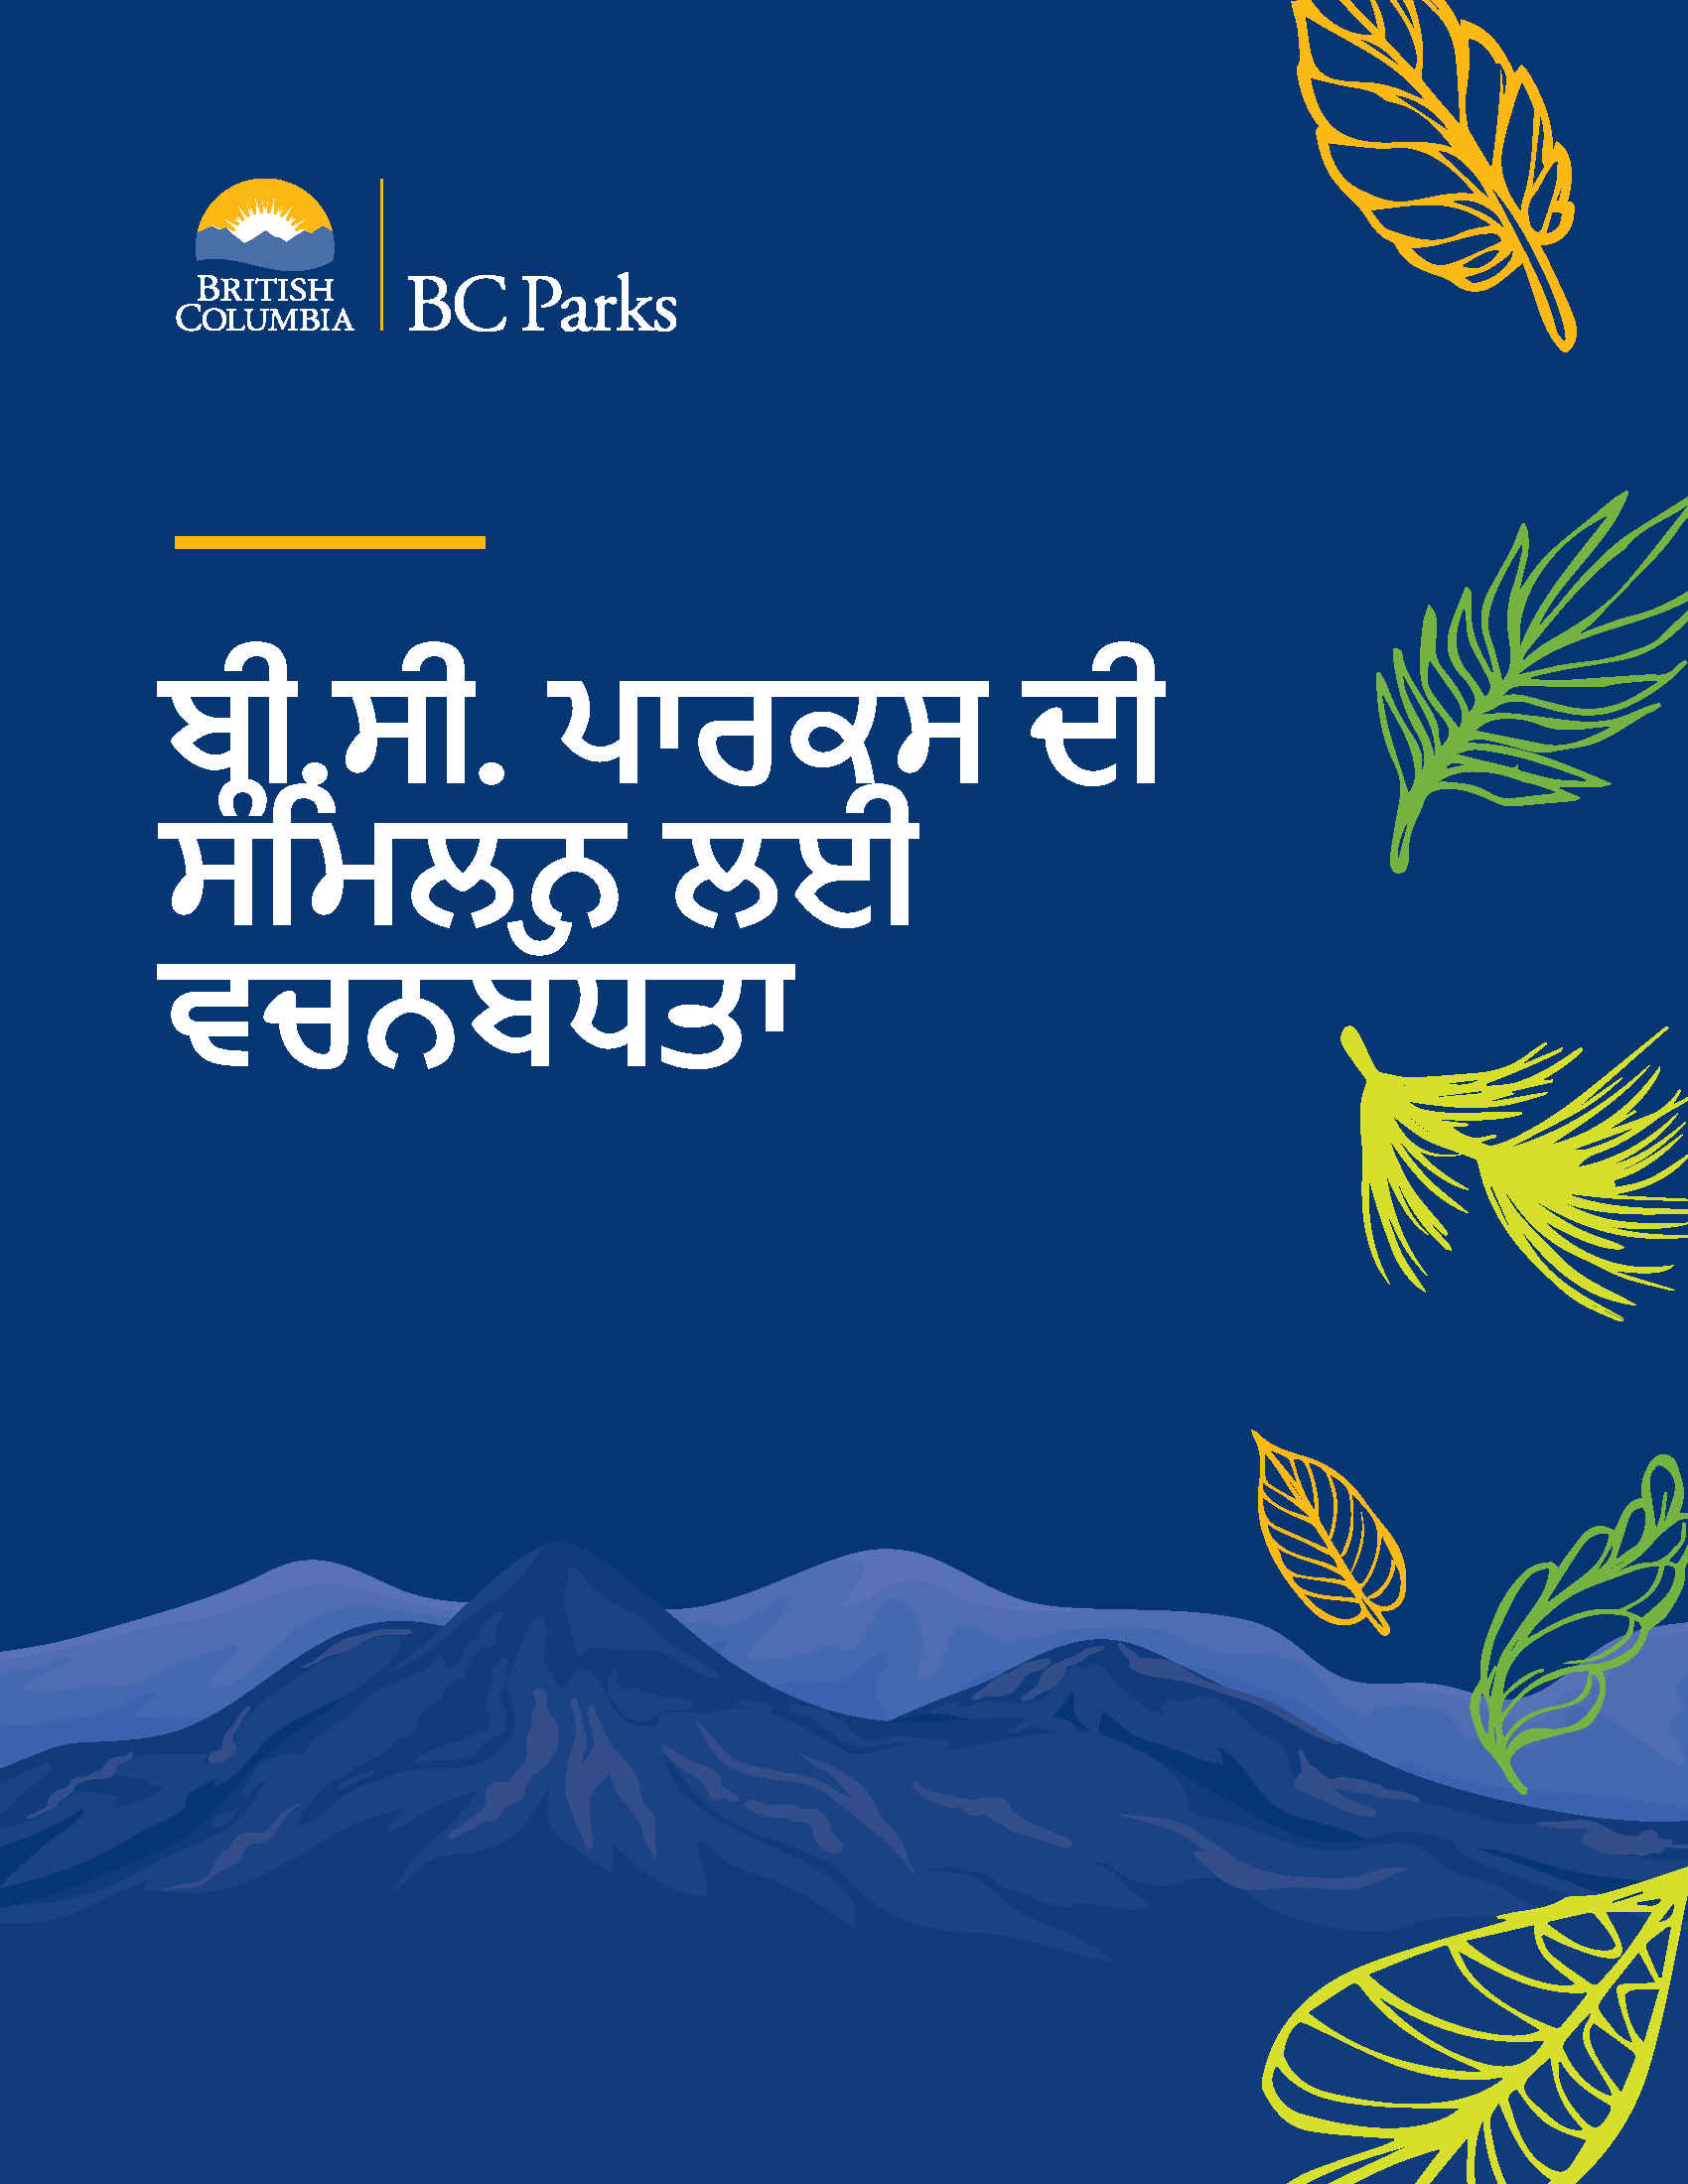 BC Parks Commitment to Inclusion in Punjabi